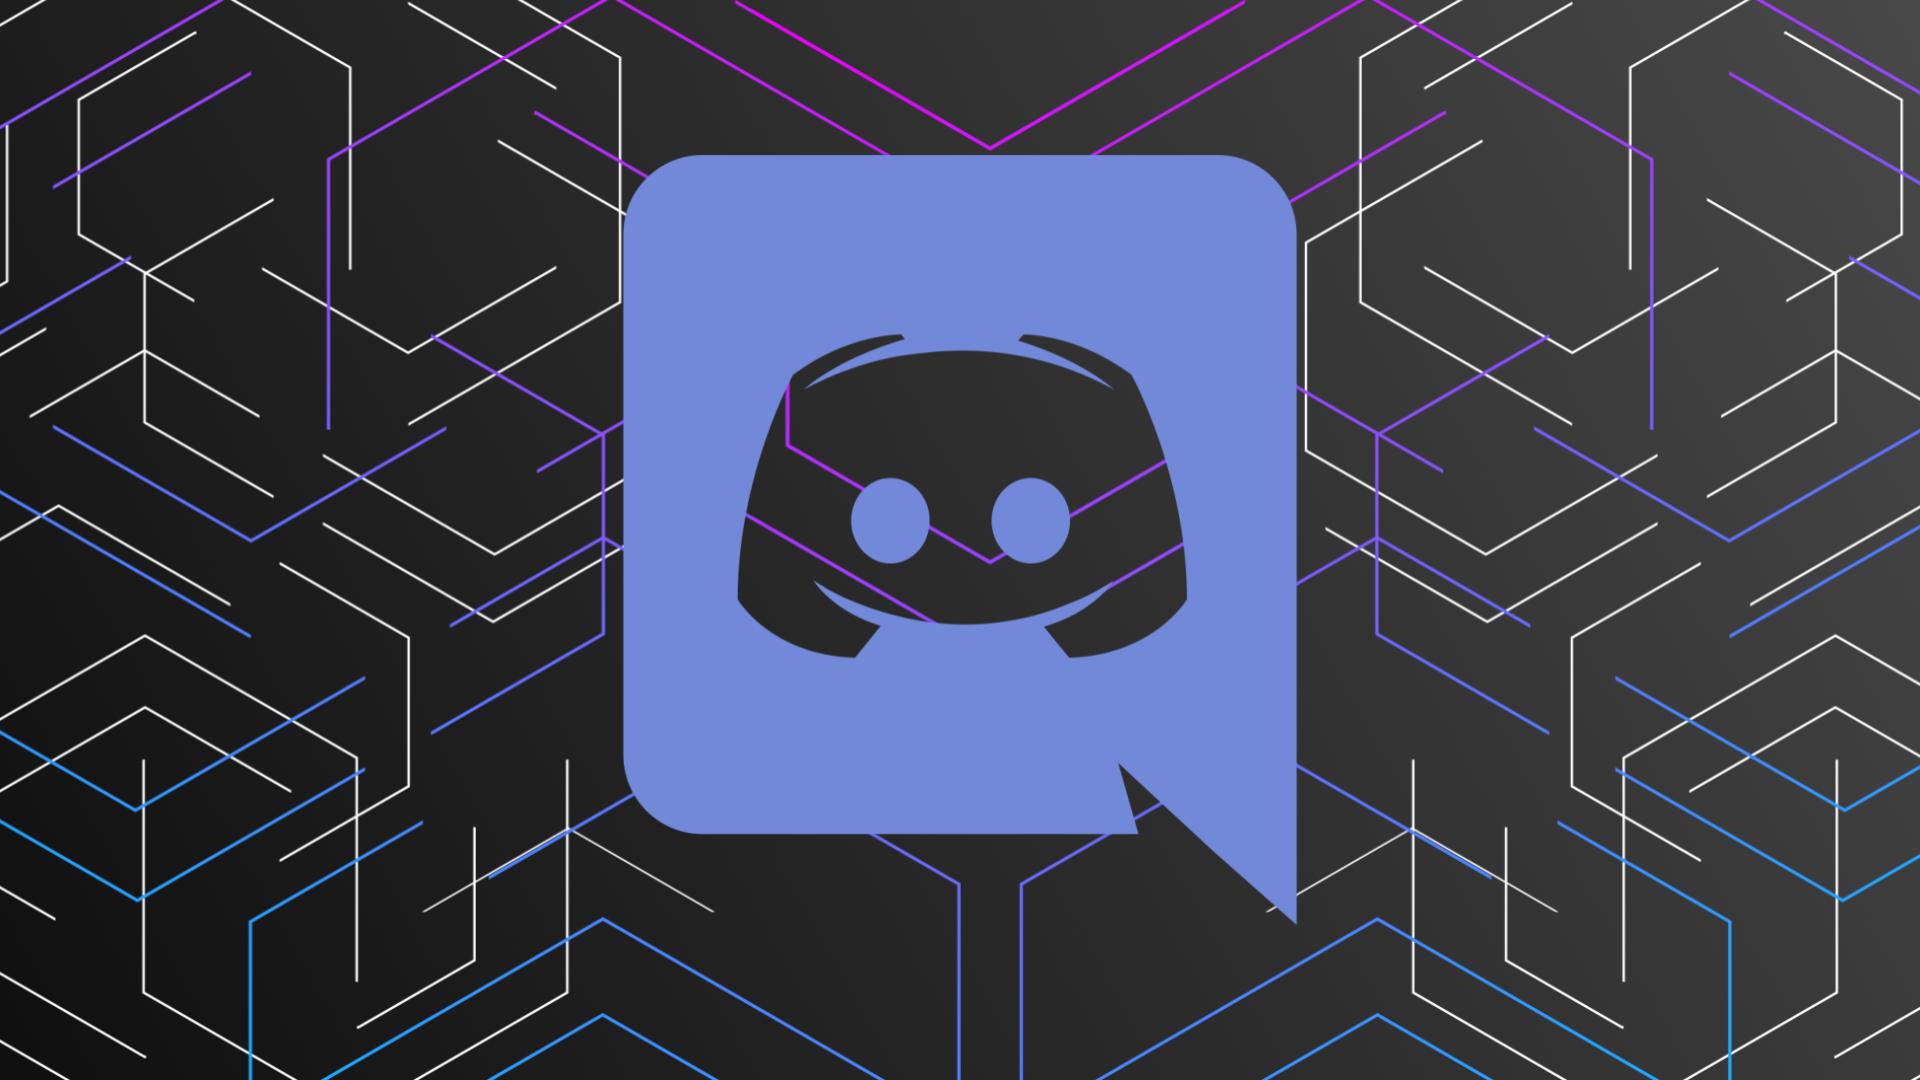 Discord: a subscription of 9.99 euros demanded as ransom